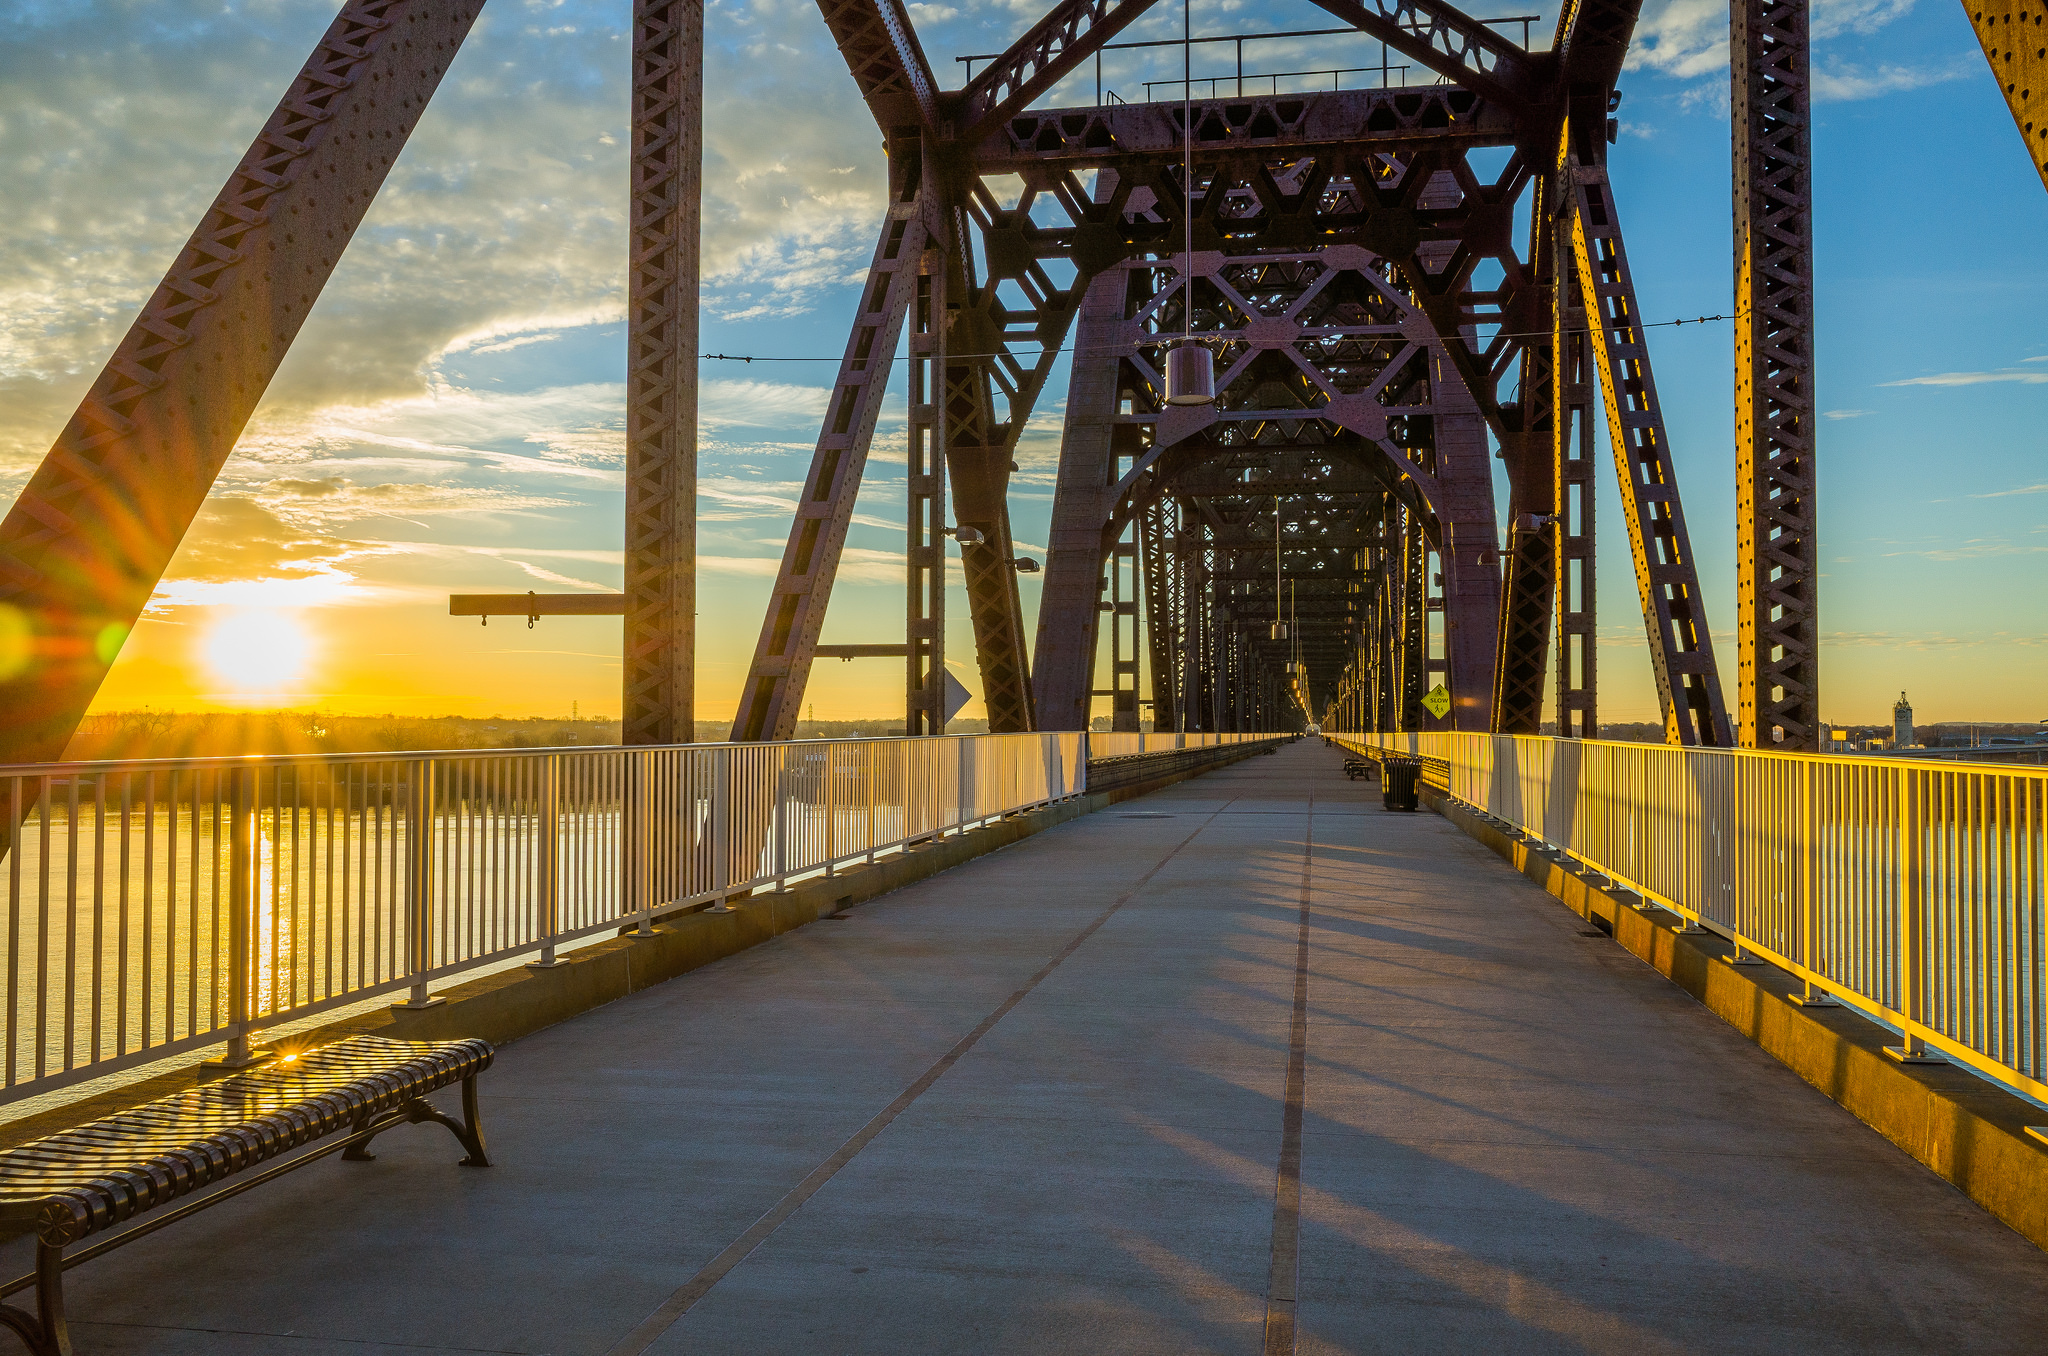 Panoramic HDR Photos of Sunset in Louisville Waterfront Park